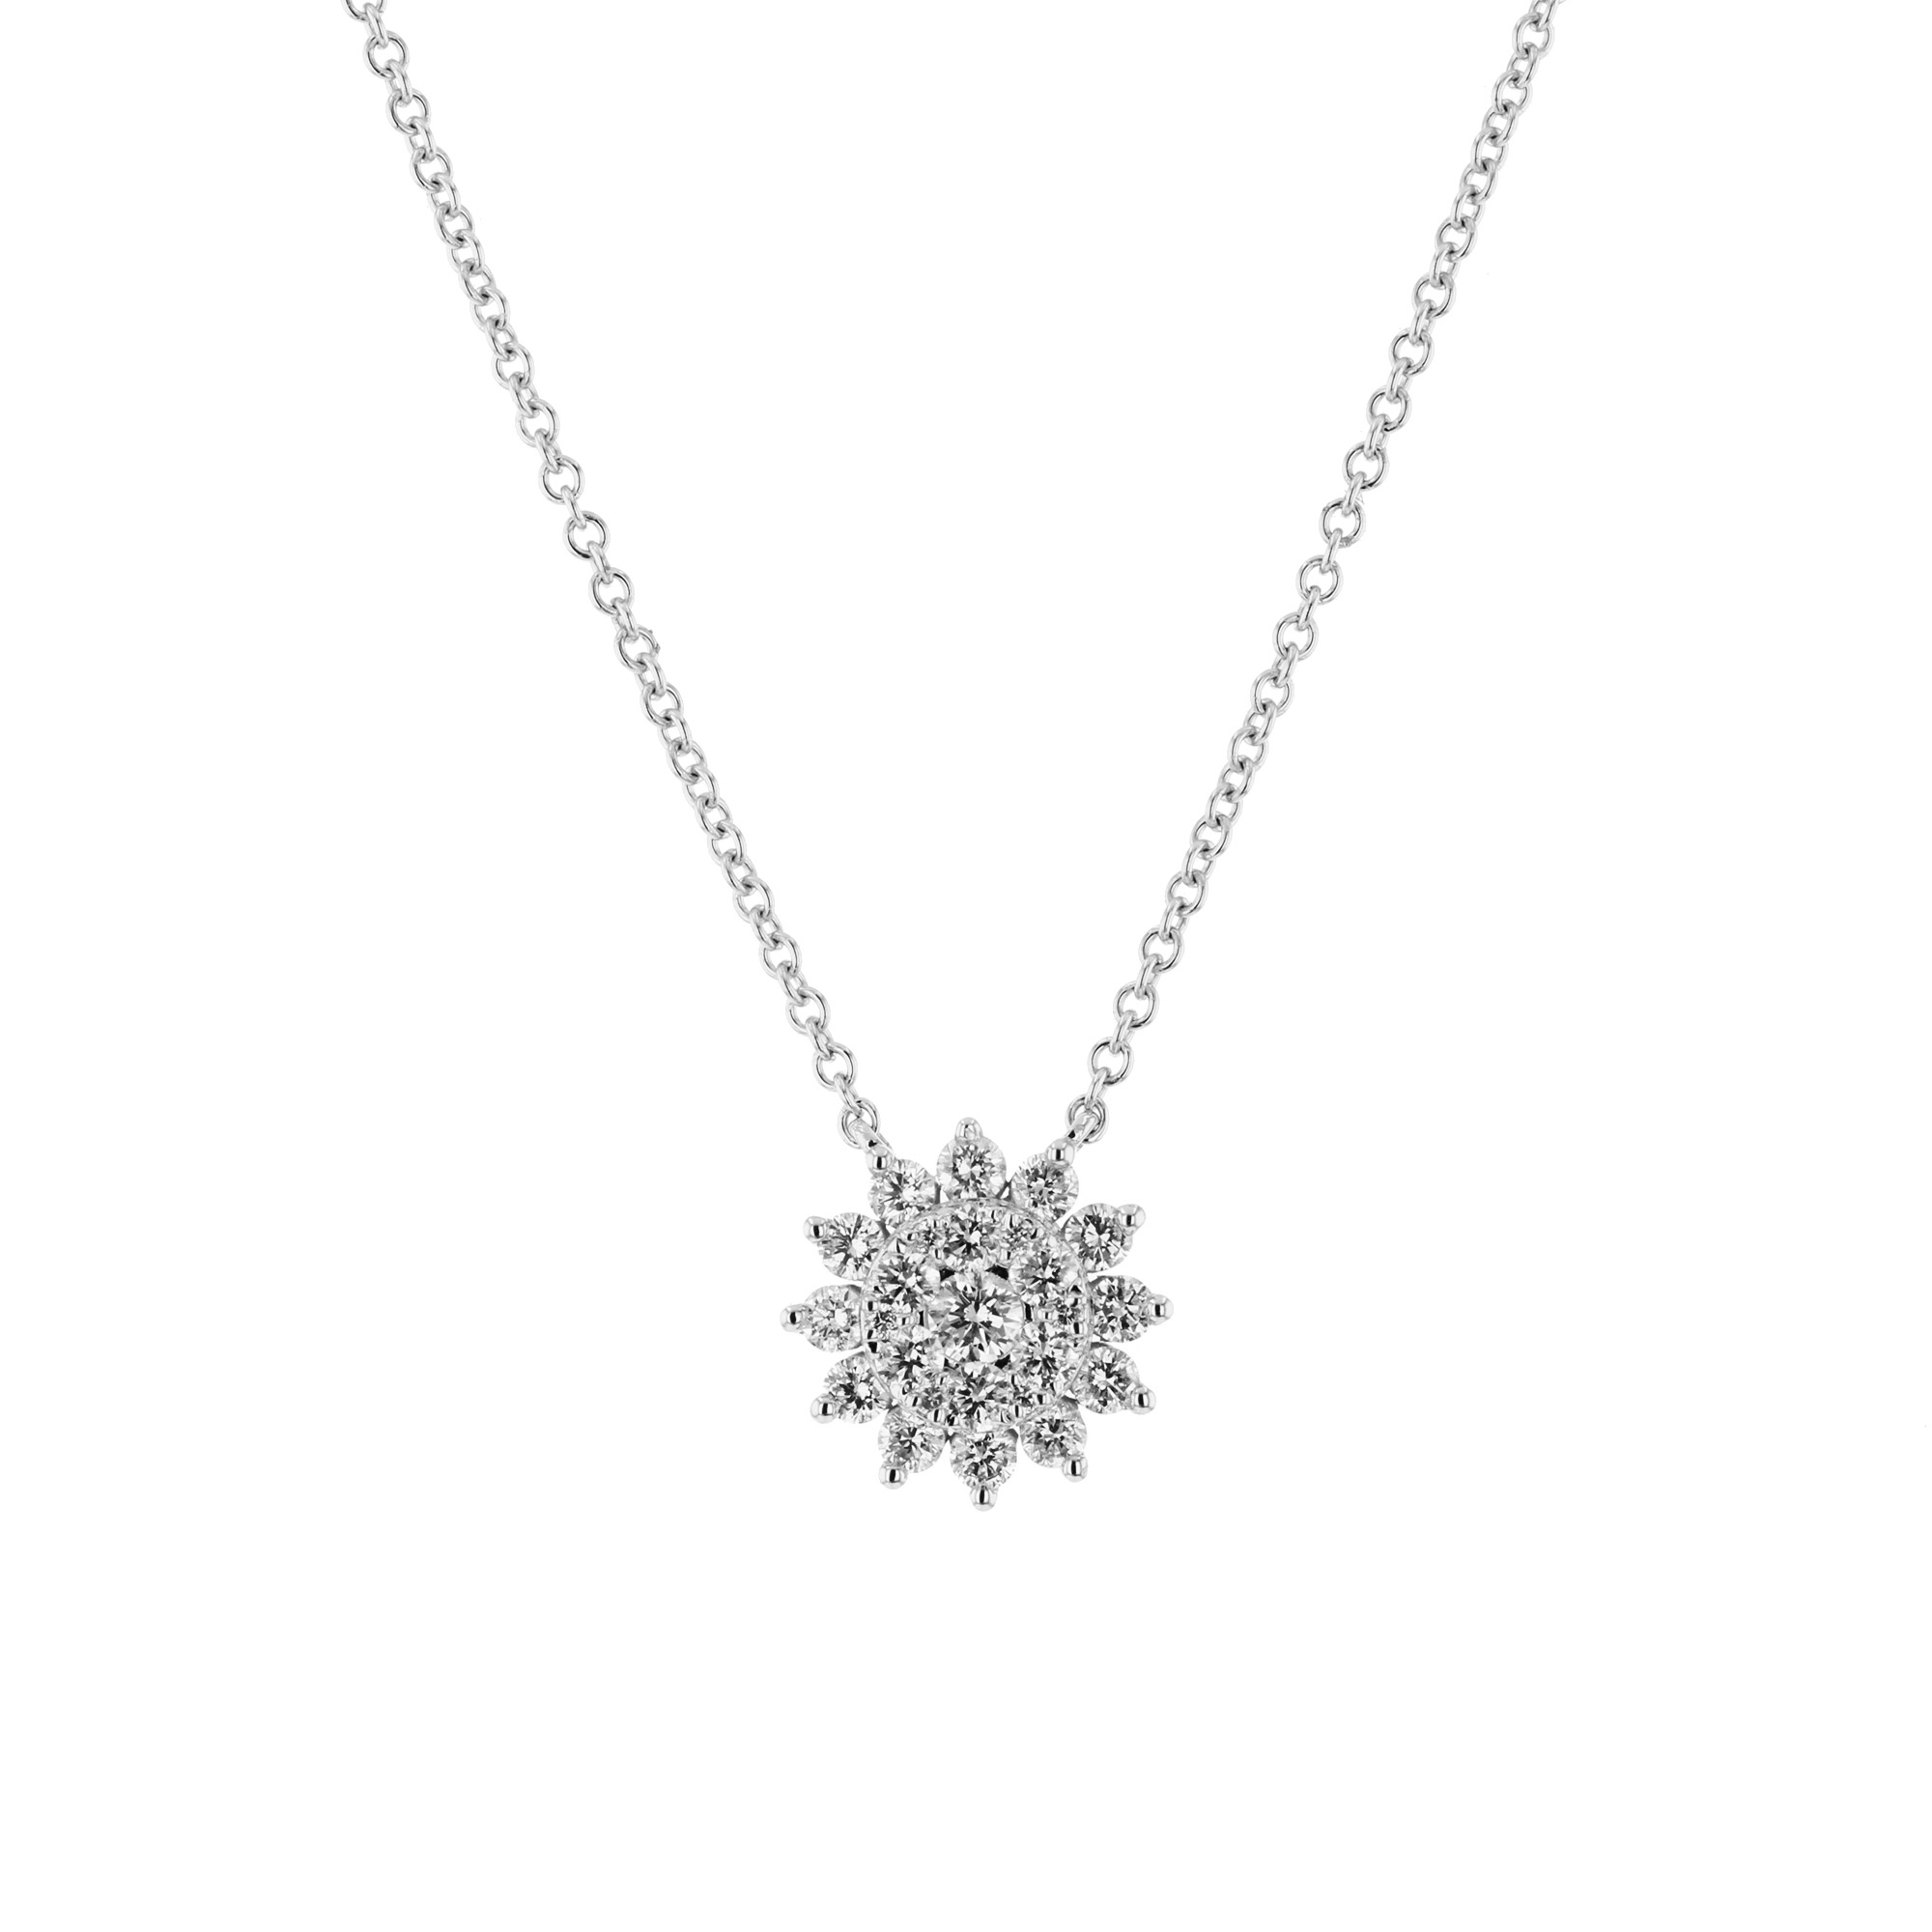 View 0.52ctw Diamond Floral Cluster Pendants in 18k White Gold